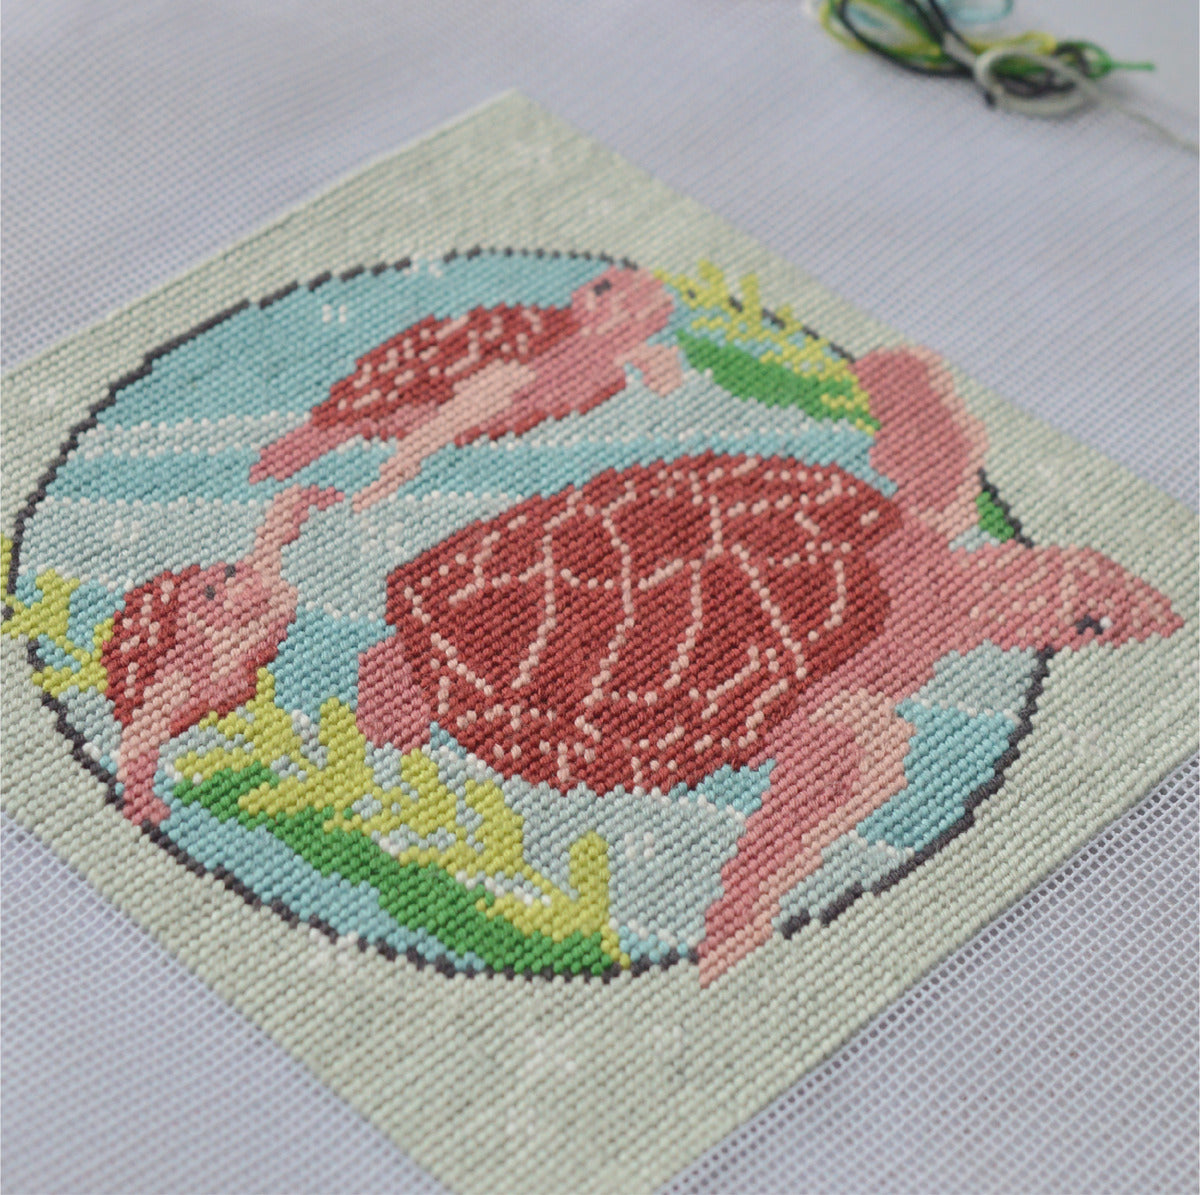 A detailed close up of the finished sea life tapestry kit showing tent stitch using soft cotton thread